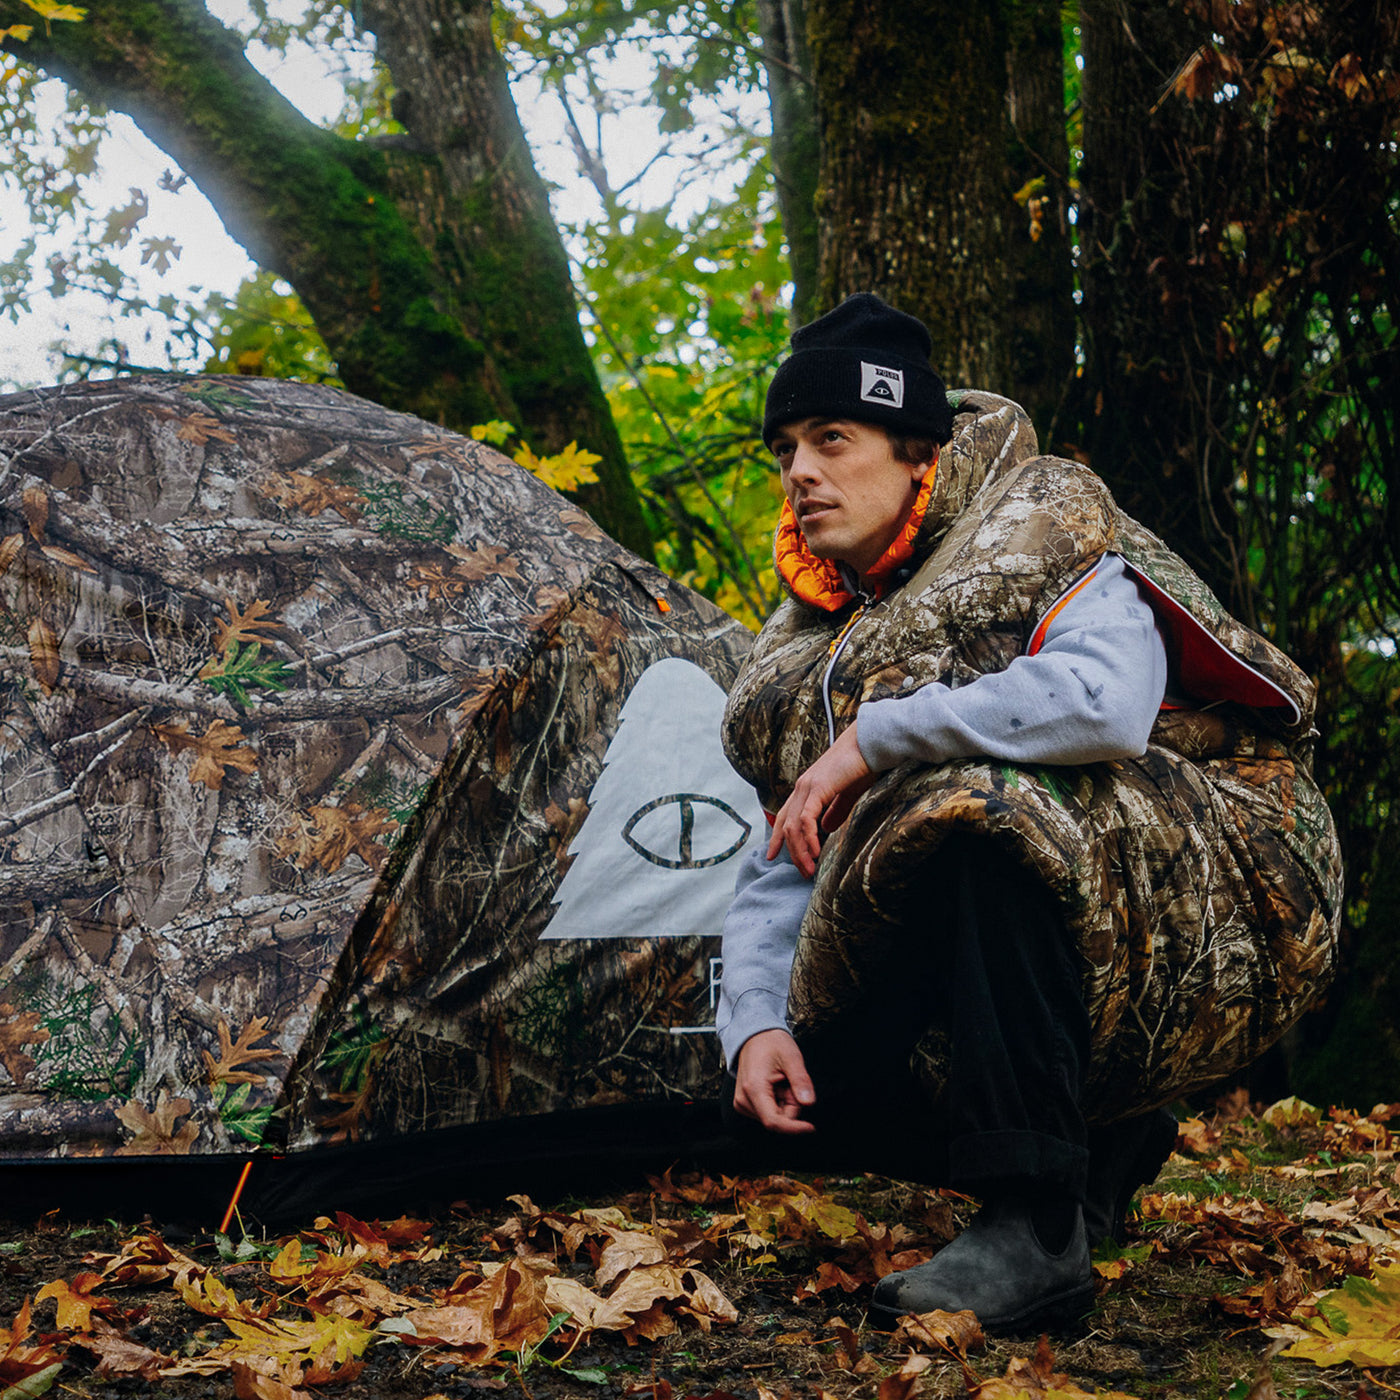 2 Person Tent - REALTREE product   